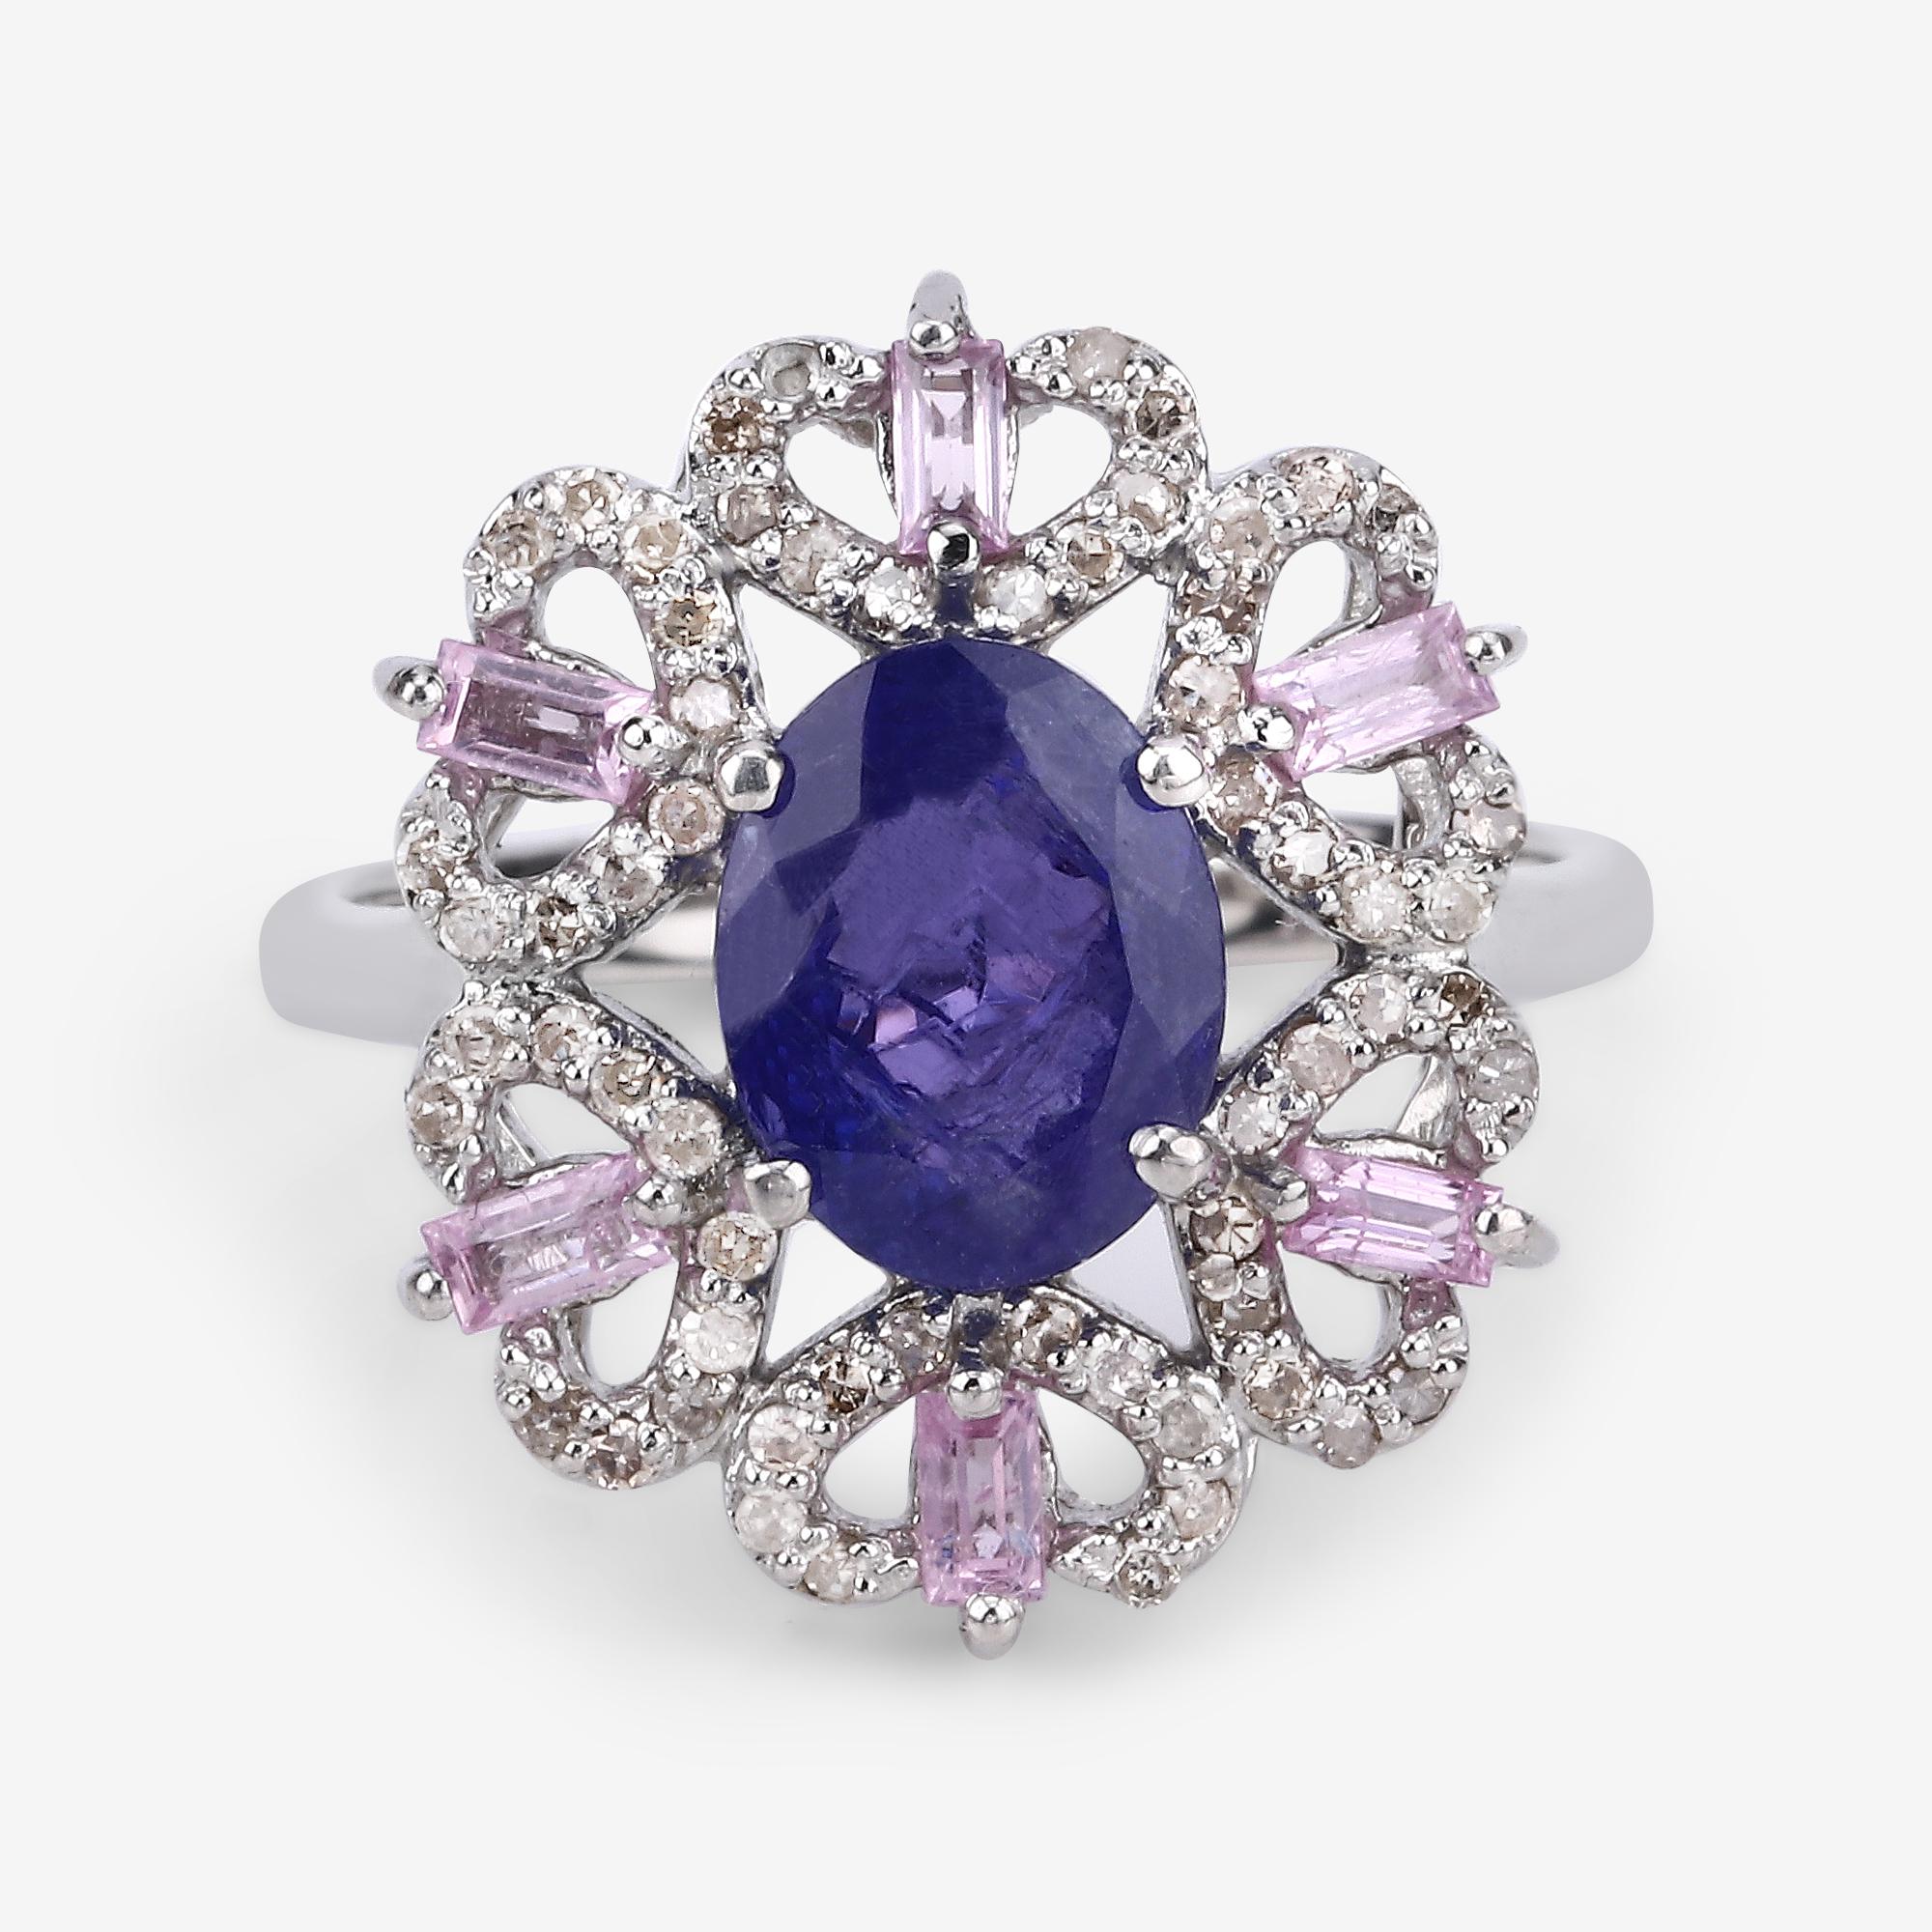 Women's 3.01cttw Tanzanite, Pink Sapphires with Diamonds 0.41cttw Sterling Silver Ring